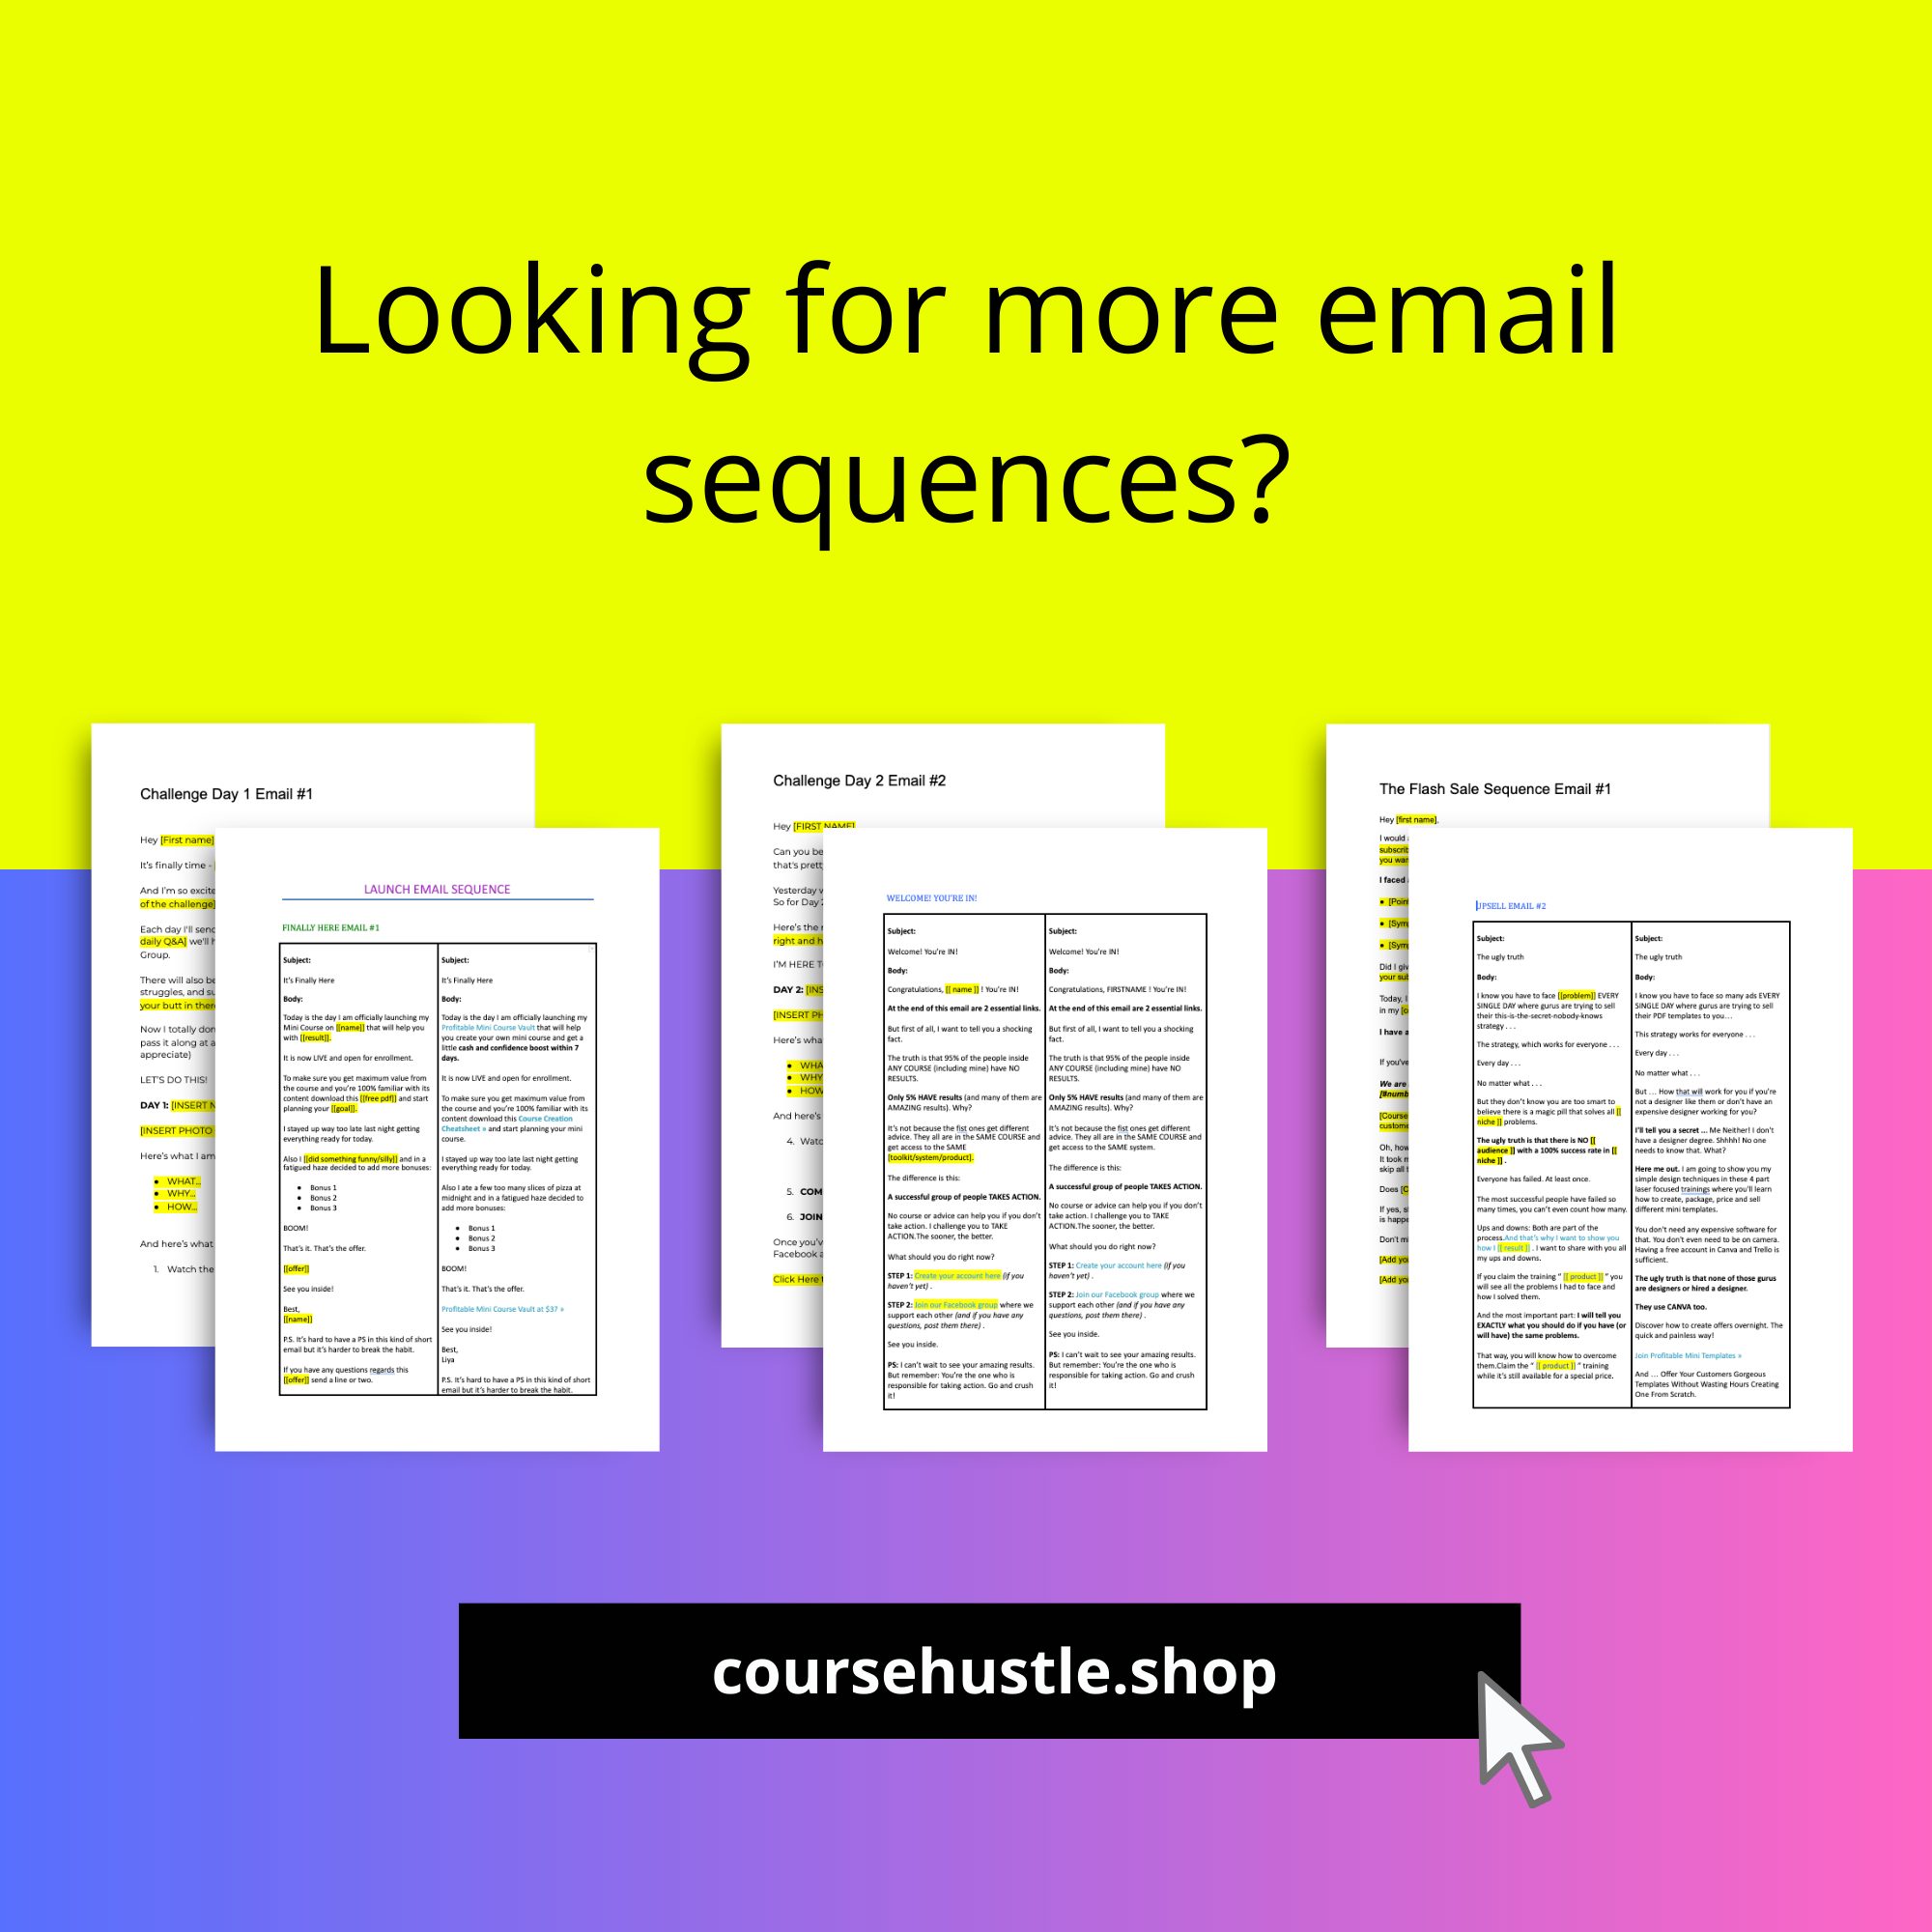 Giveaway Email Sequence | Done-For-You Email Templates